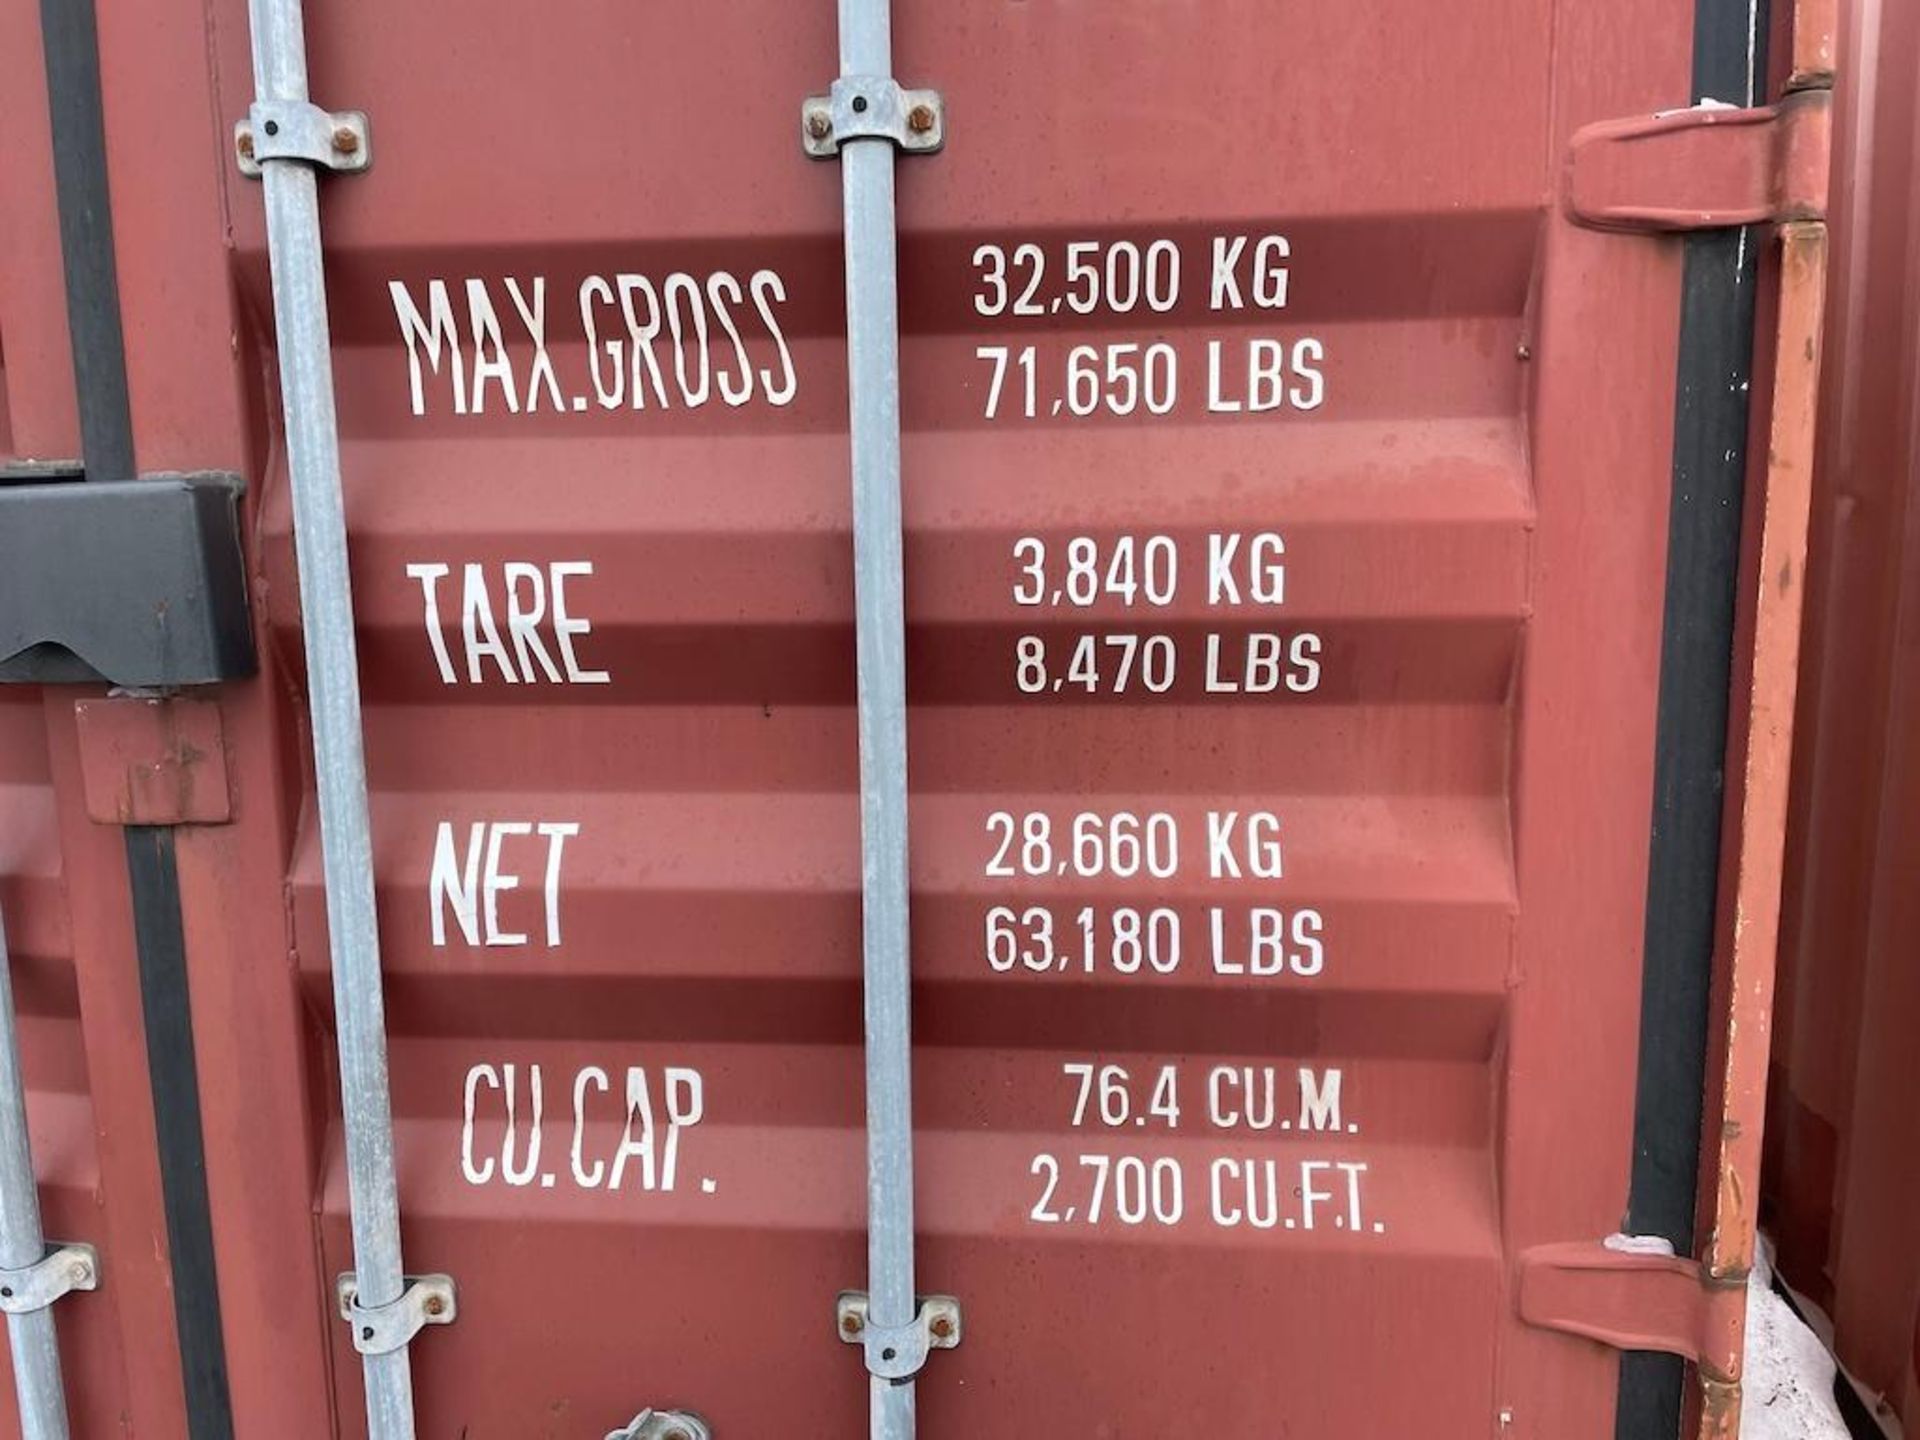 40 FT SEA CONTAINER, EXCLUDING CONTENTS, DELAYED PICK UP UNTIL MAY 13 [14] [TROIS RIVIERES] *PLEASE - Image 3 of 4